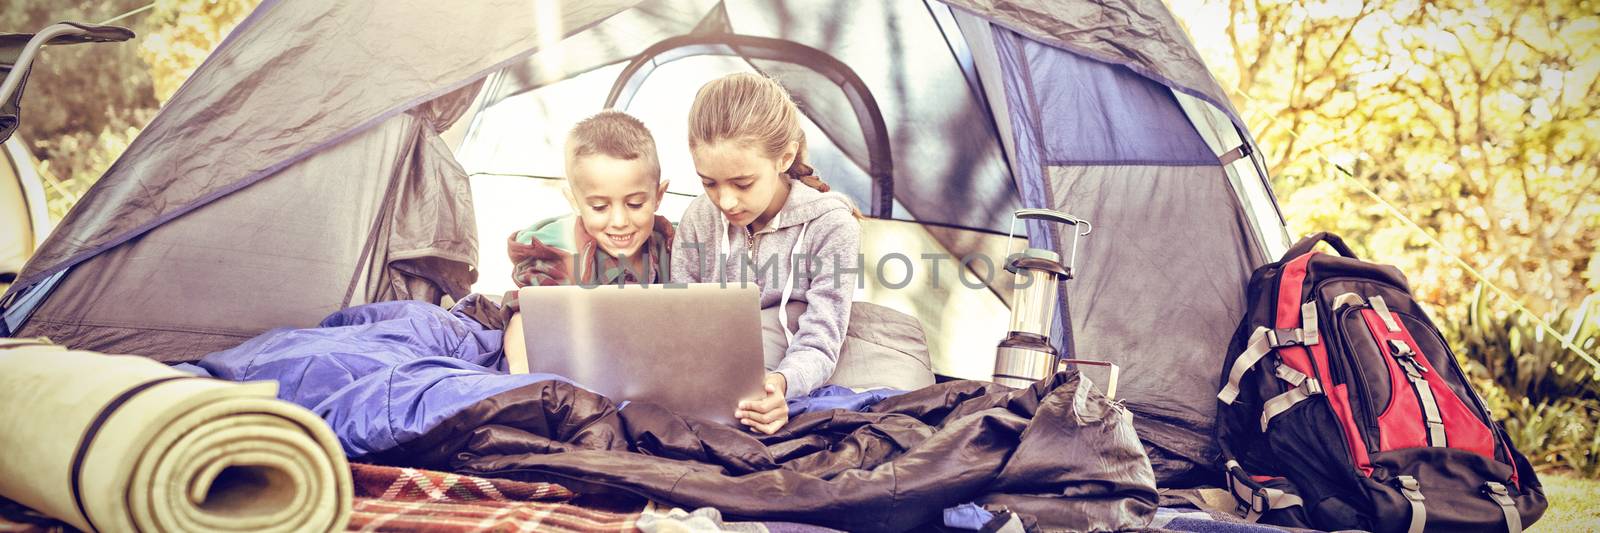 Kids using laptop in the tent at campsite